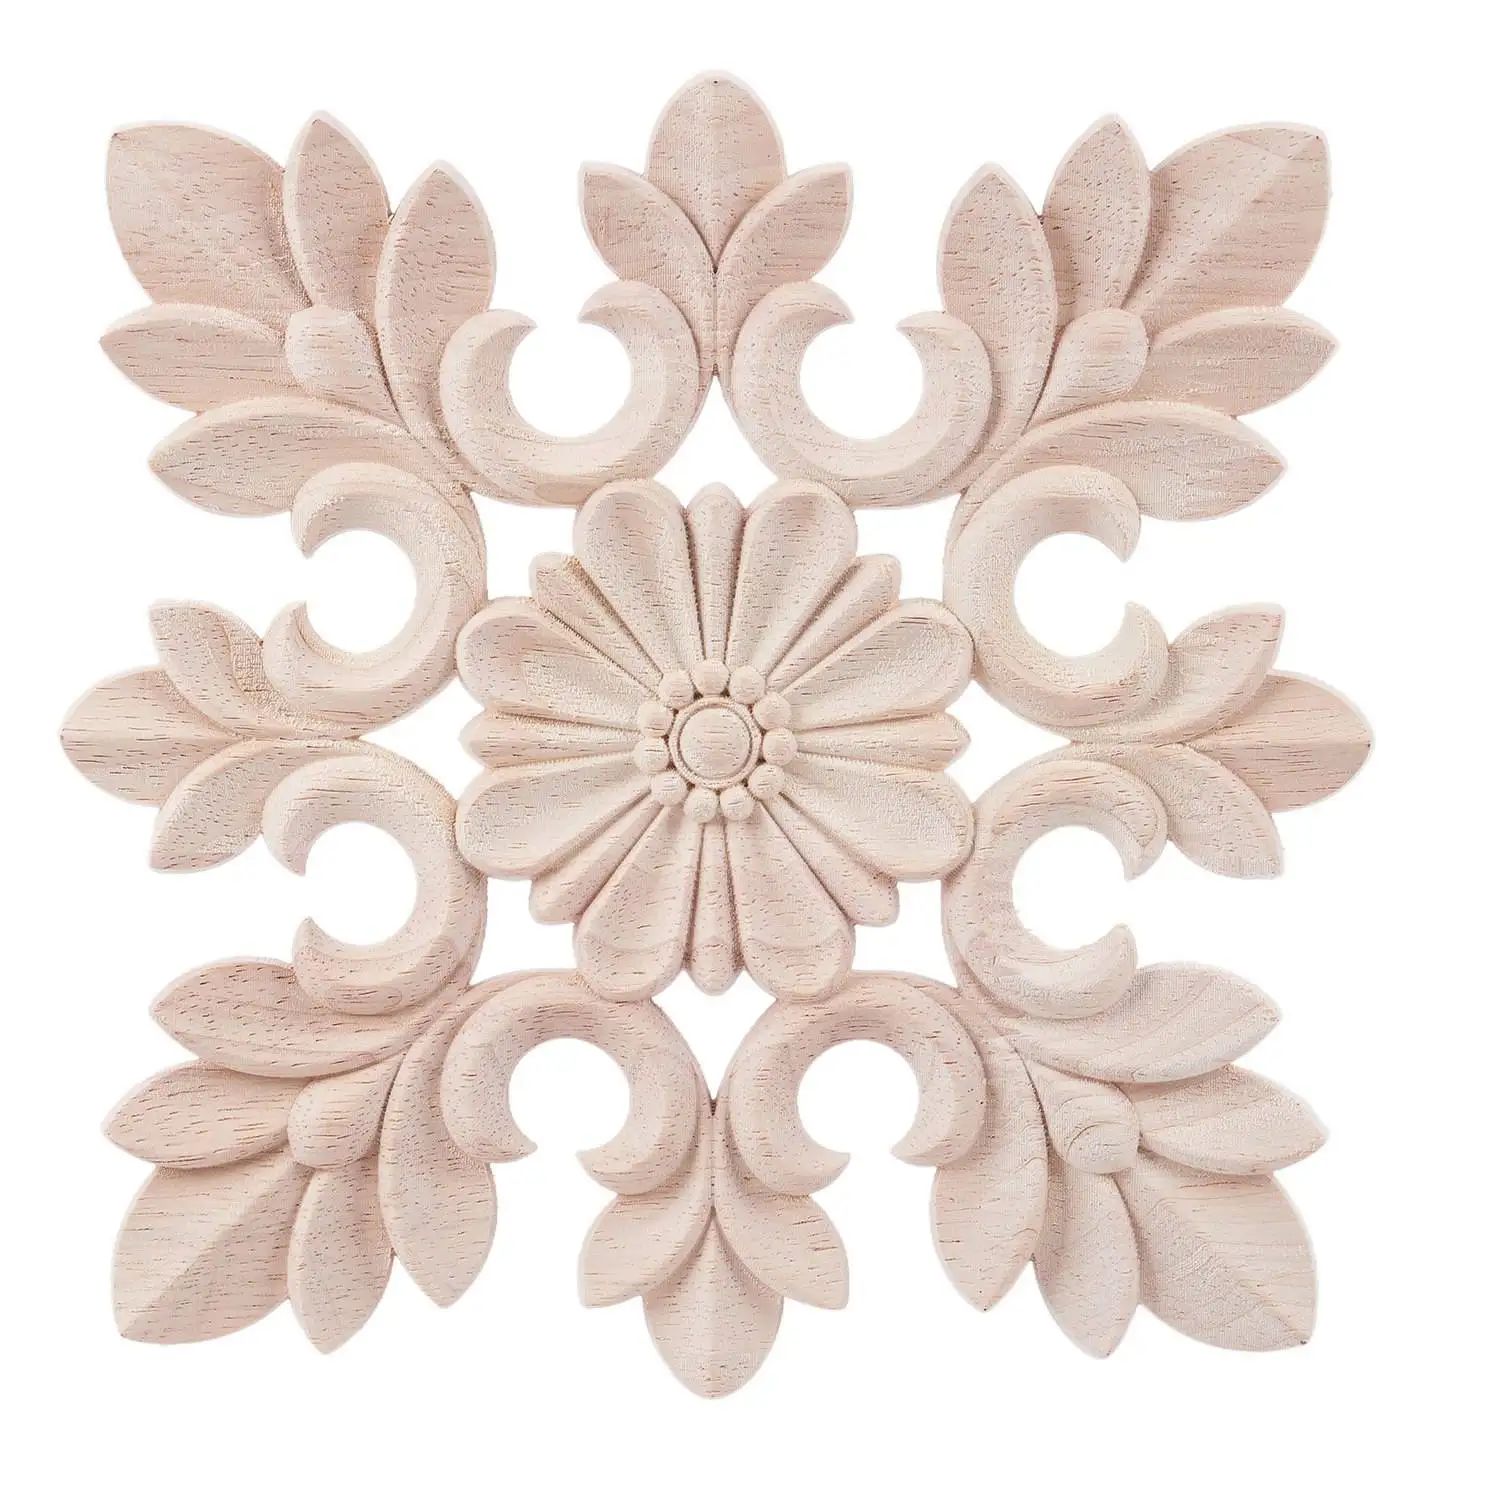 

1X Rubber Wood Carved Floral Decal Craft Onlay Applique Furniture DIY Decor #C:20*20cm